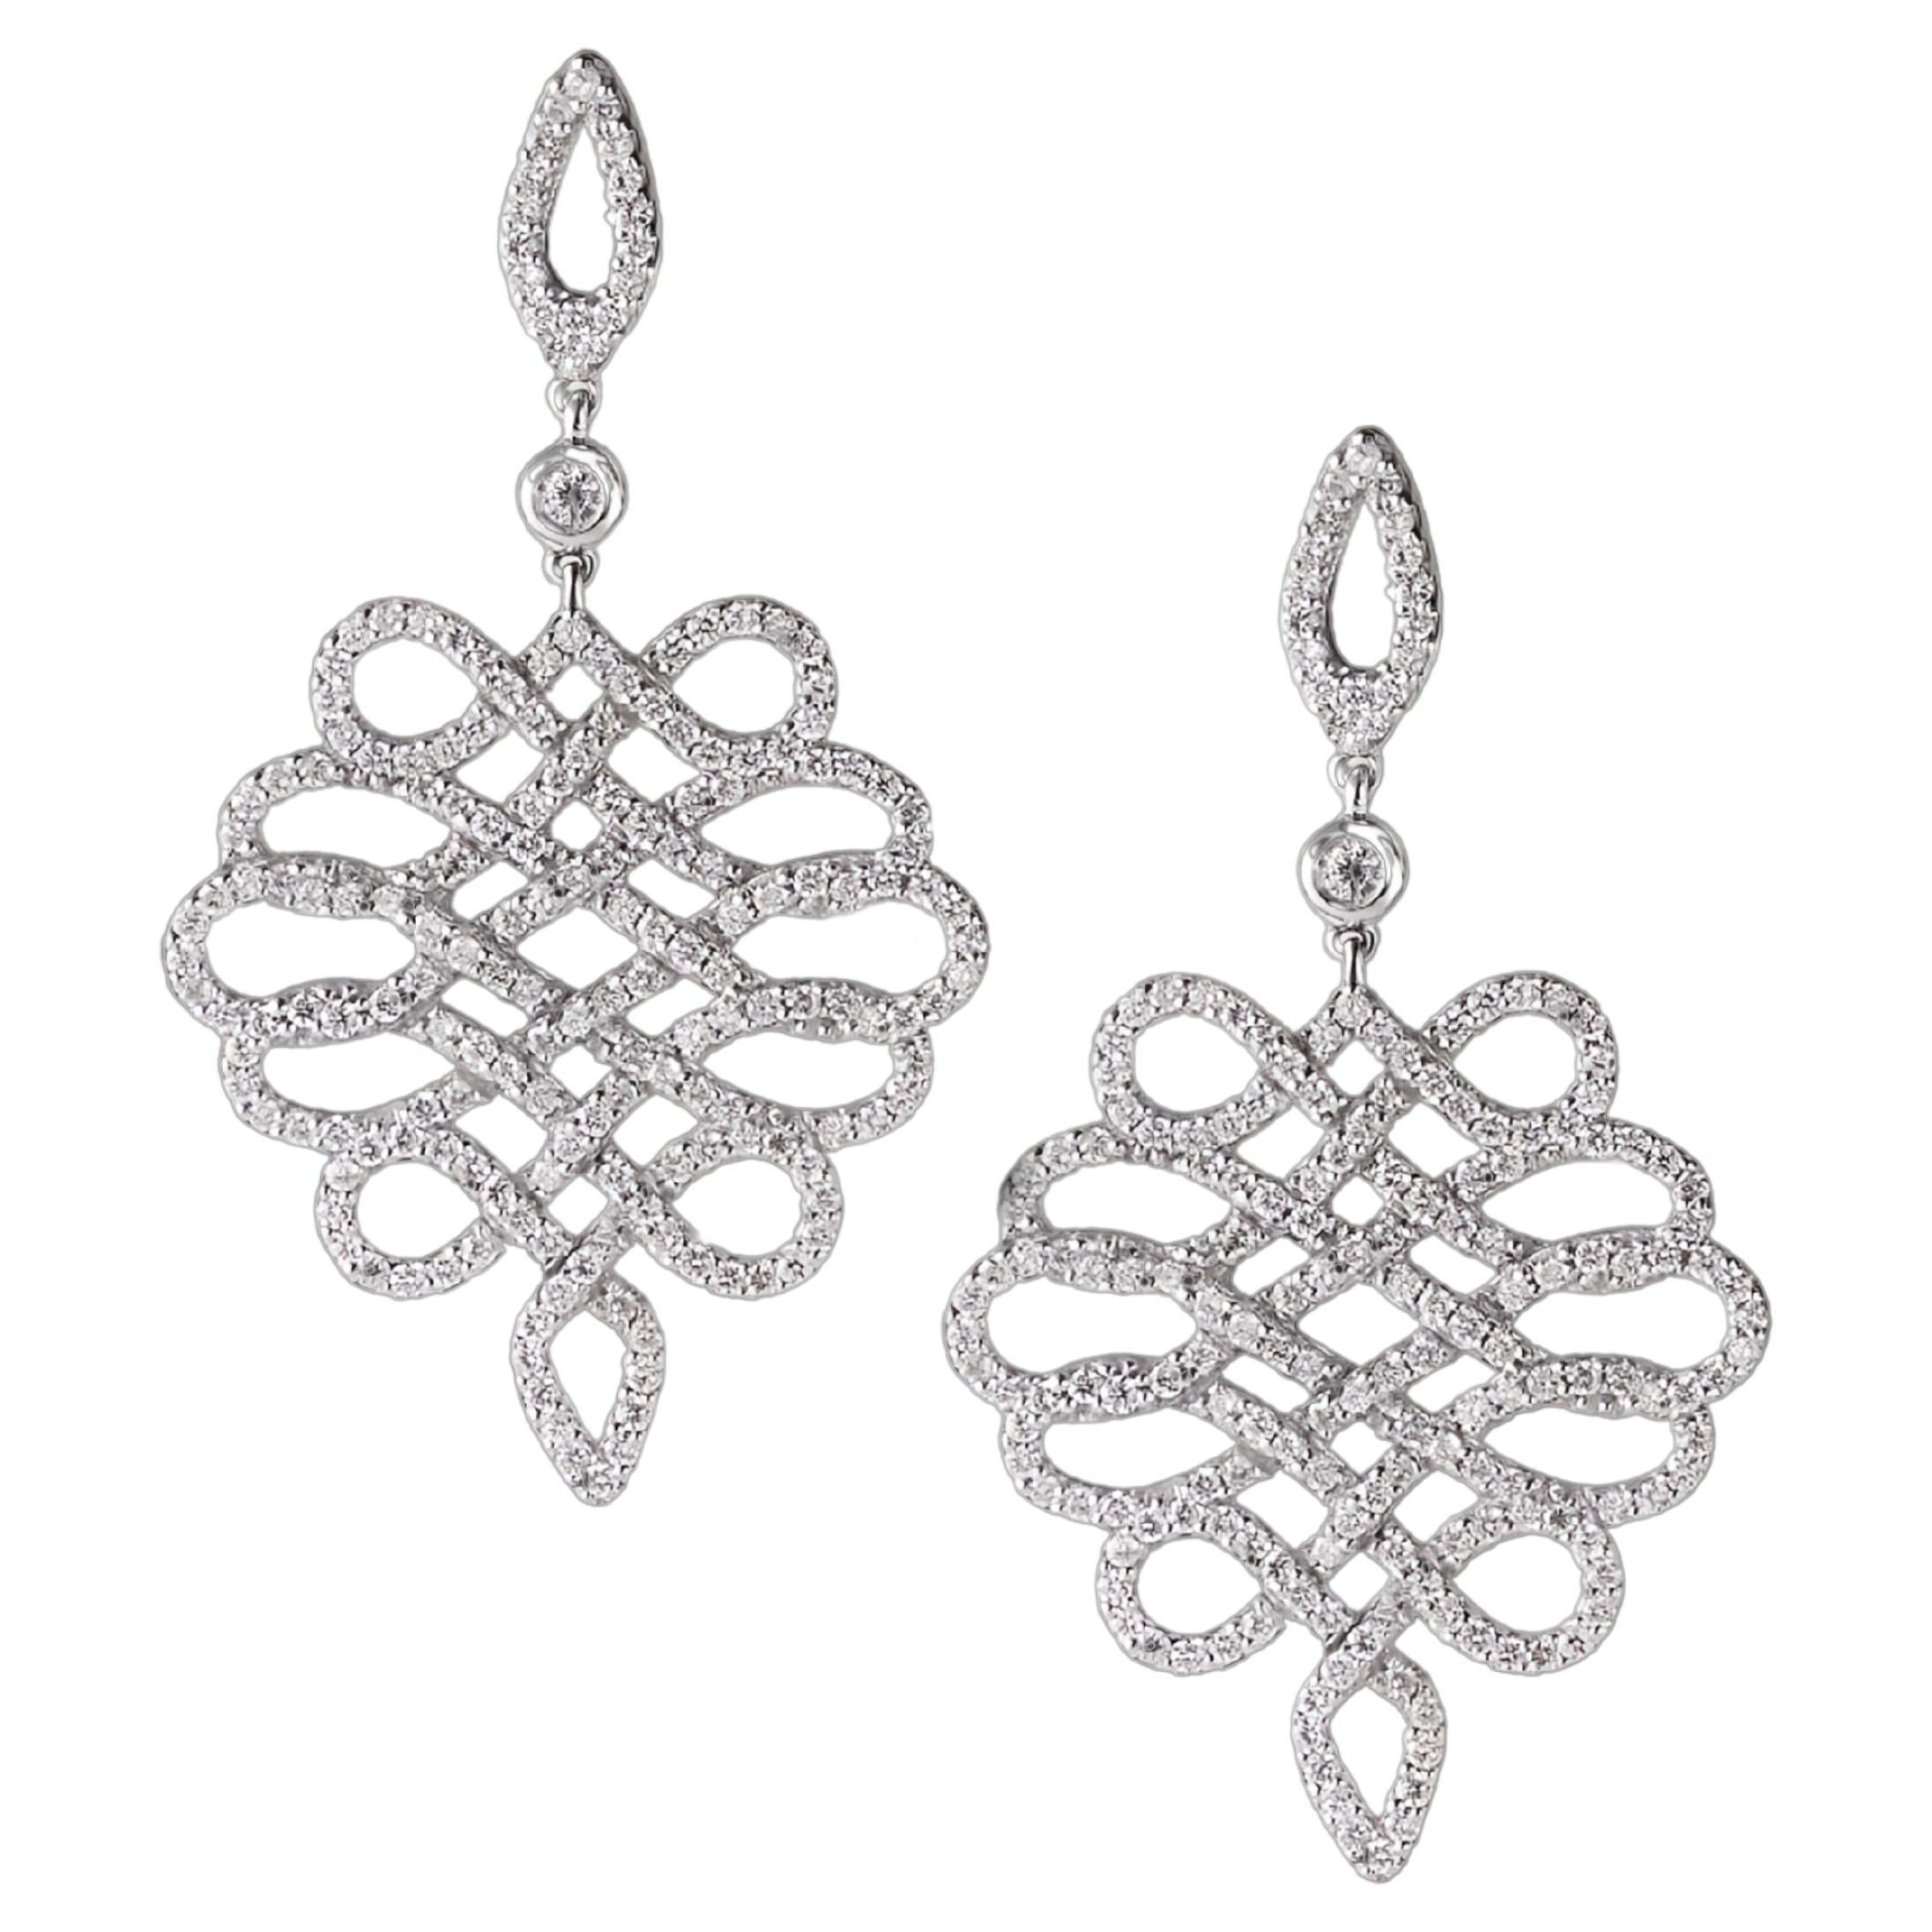 Essence of Flow: 18kt Gold Earrings with Natural White Diamonds